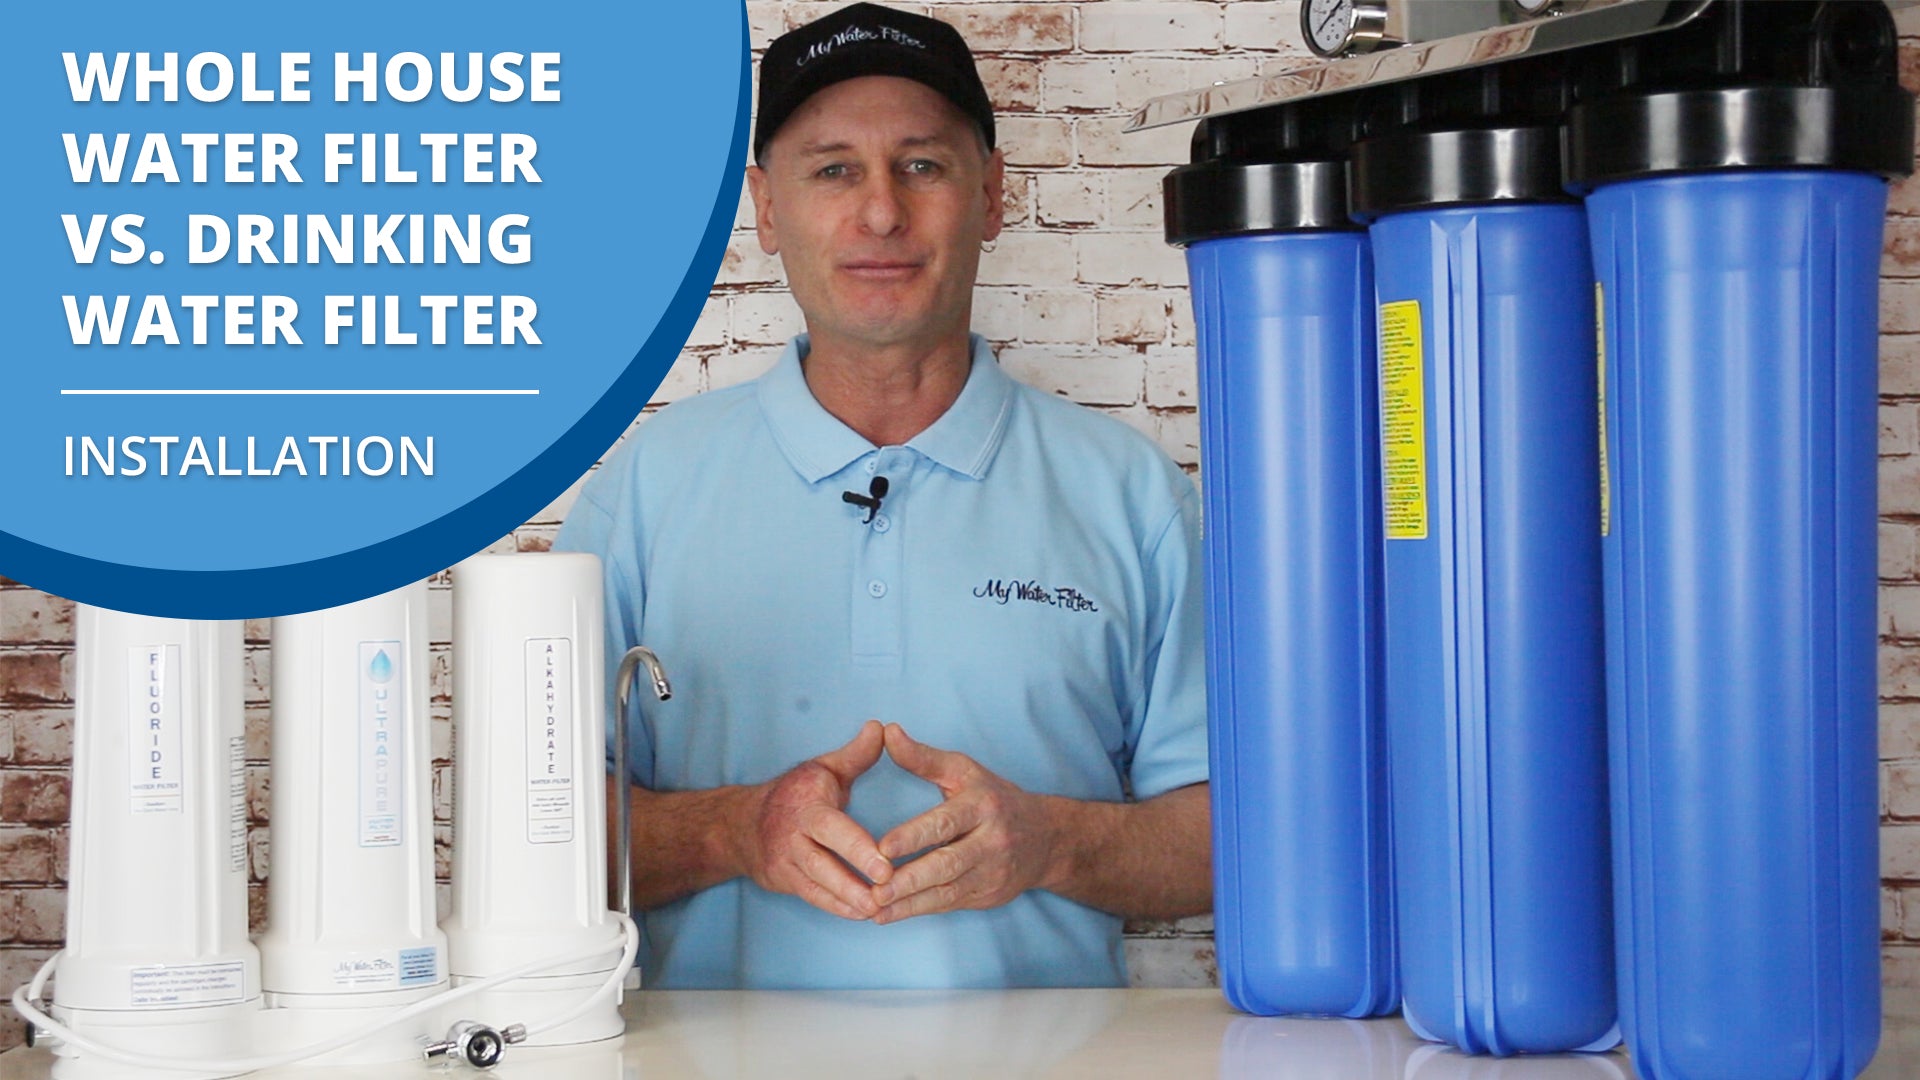 Water Filter Comparison - Whole House Vs. Drinking Water Filter Installation [VIDEO]